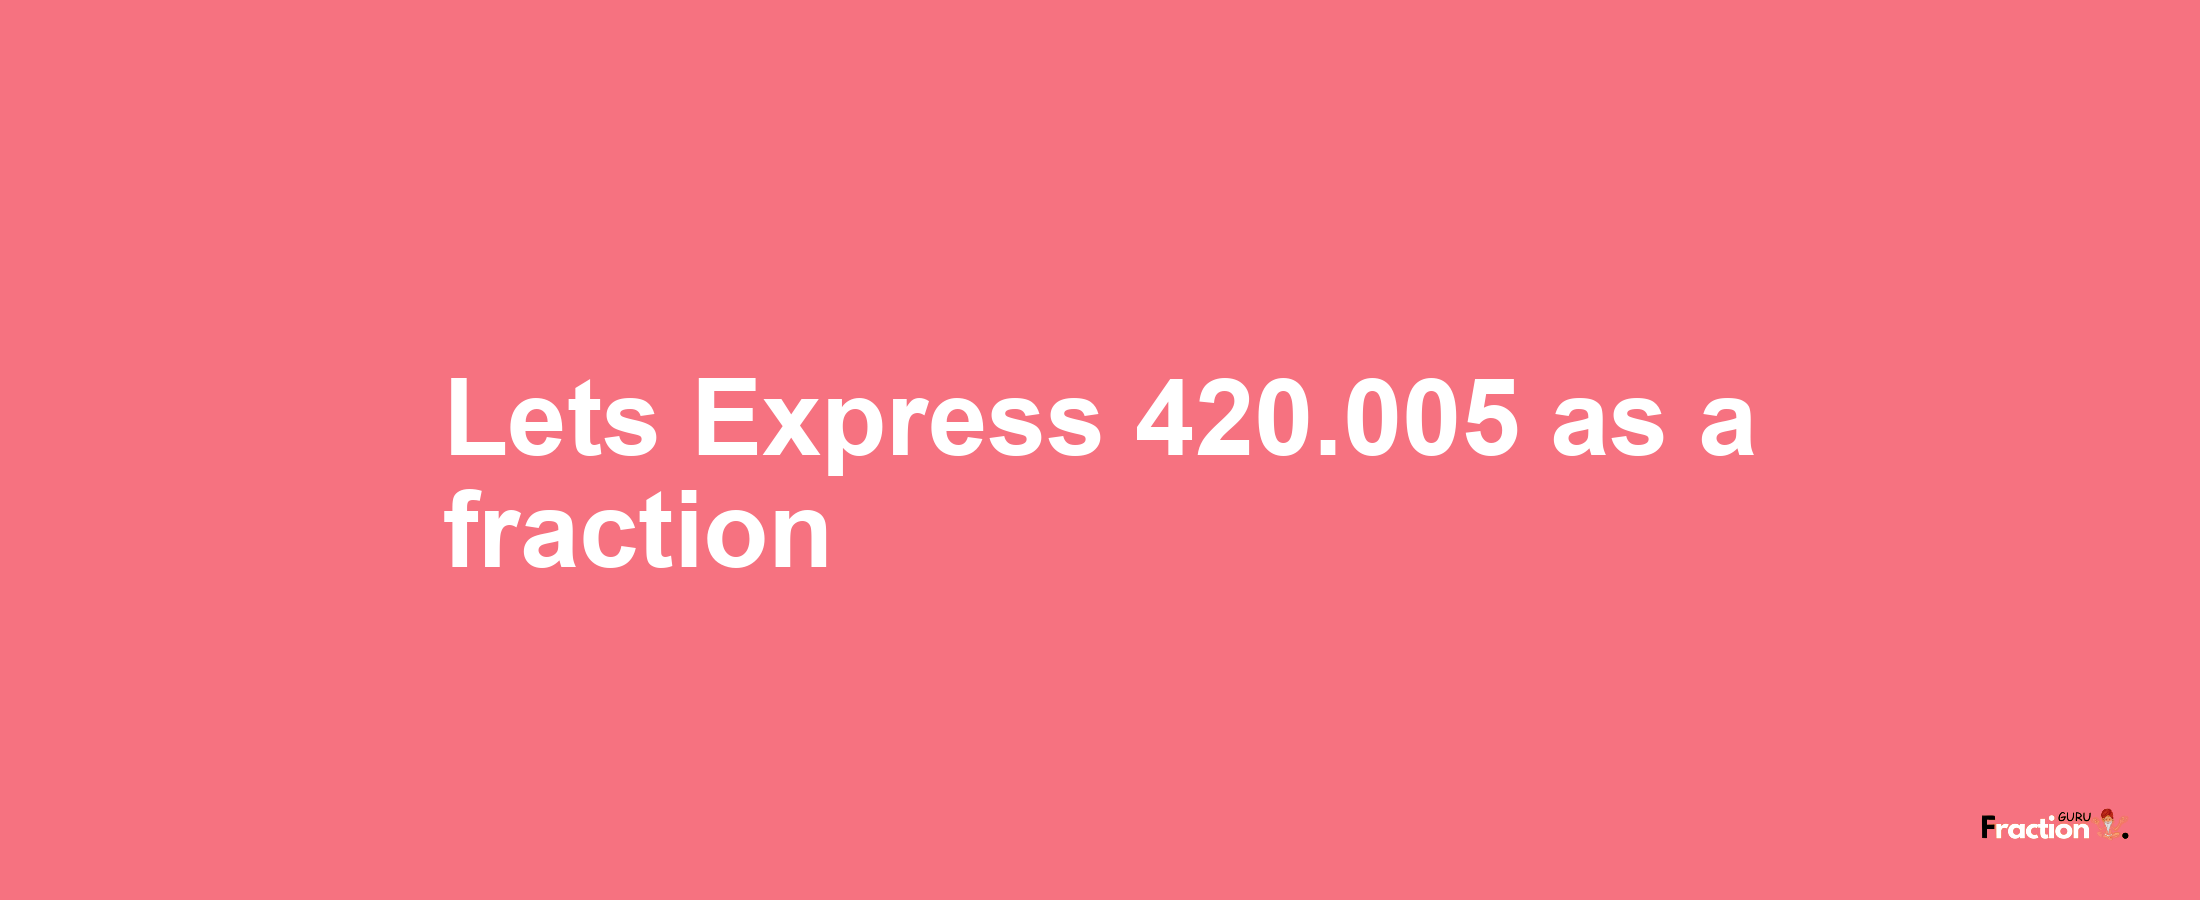 Lets Express 420.005 as afraction